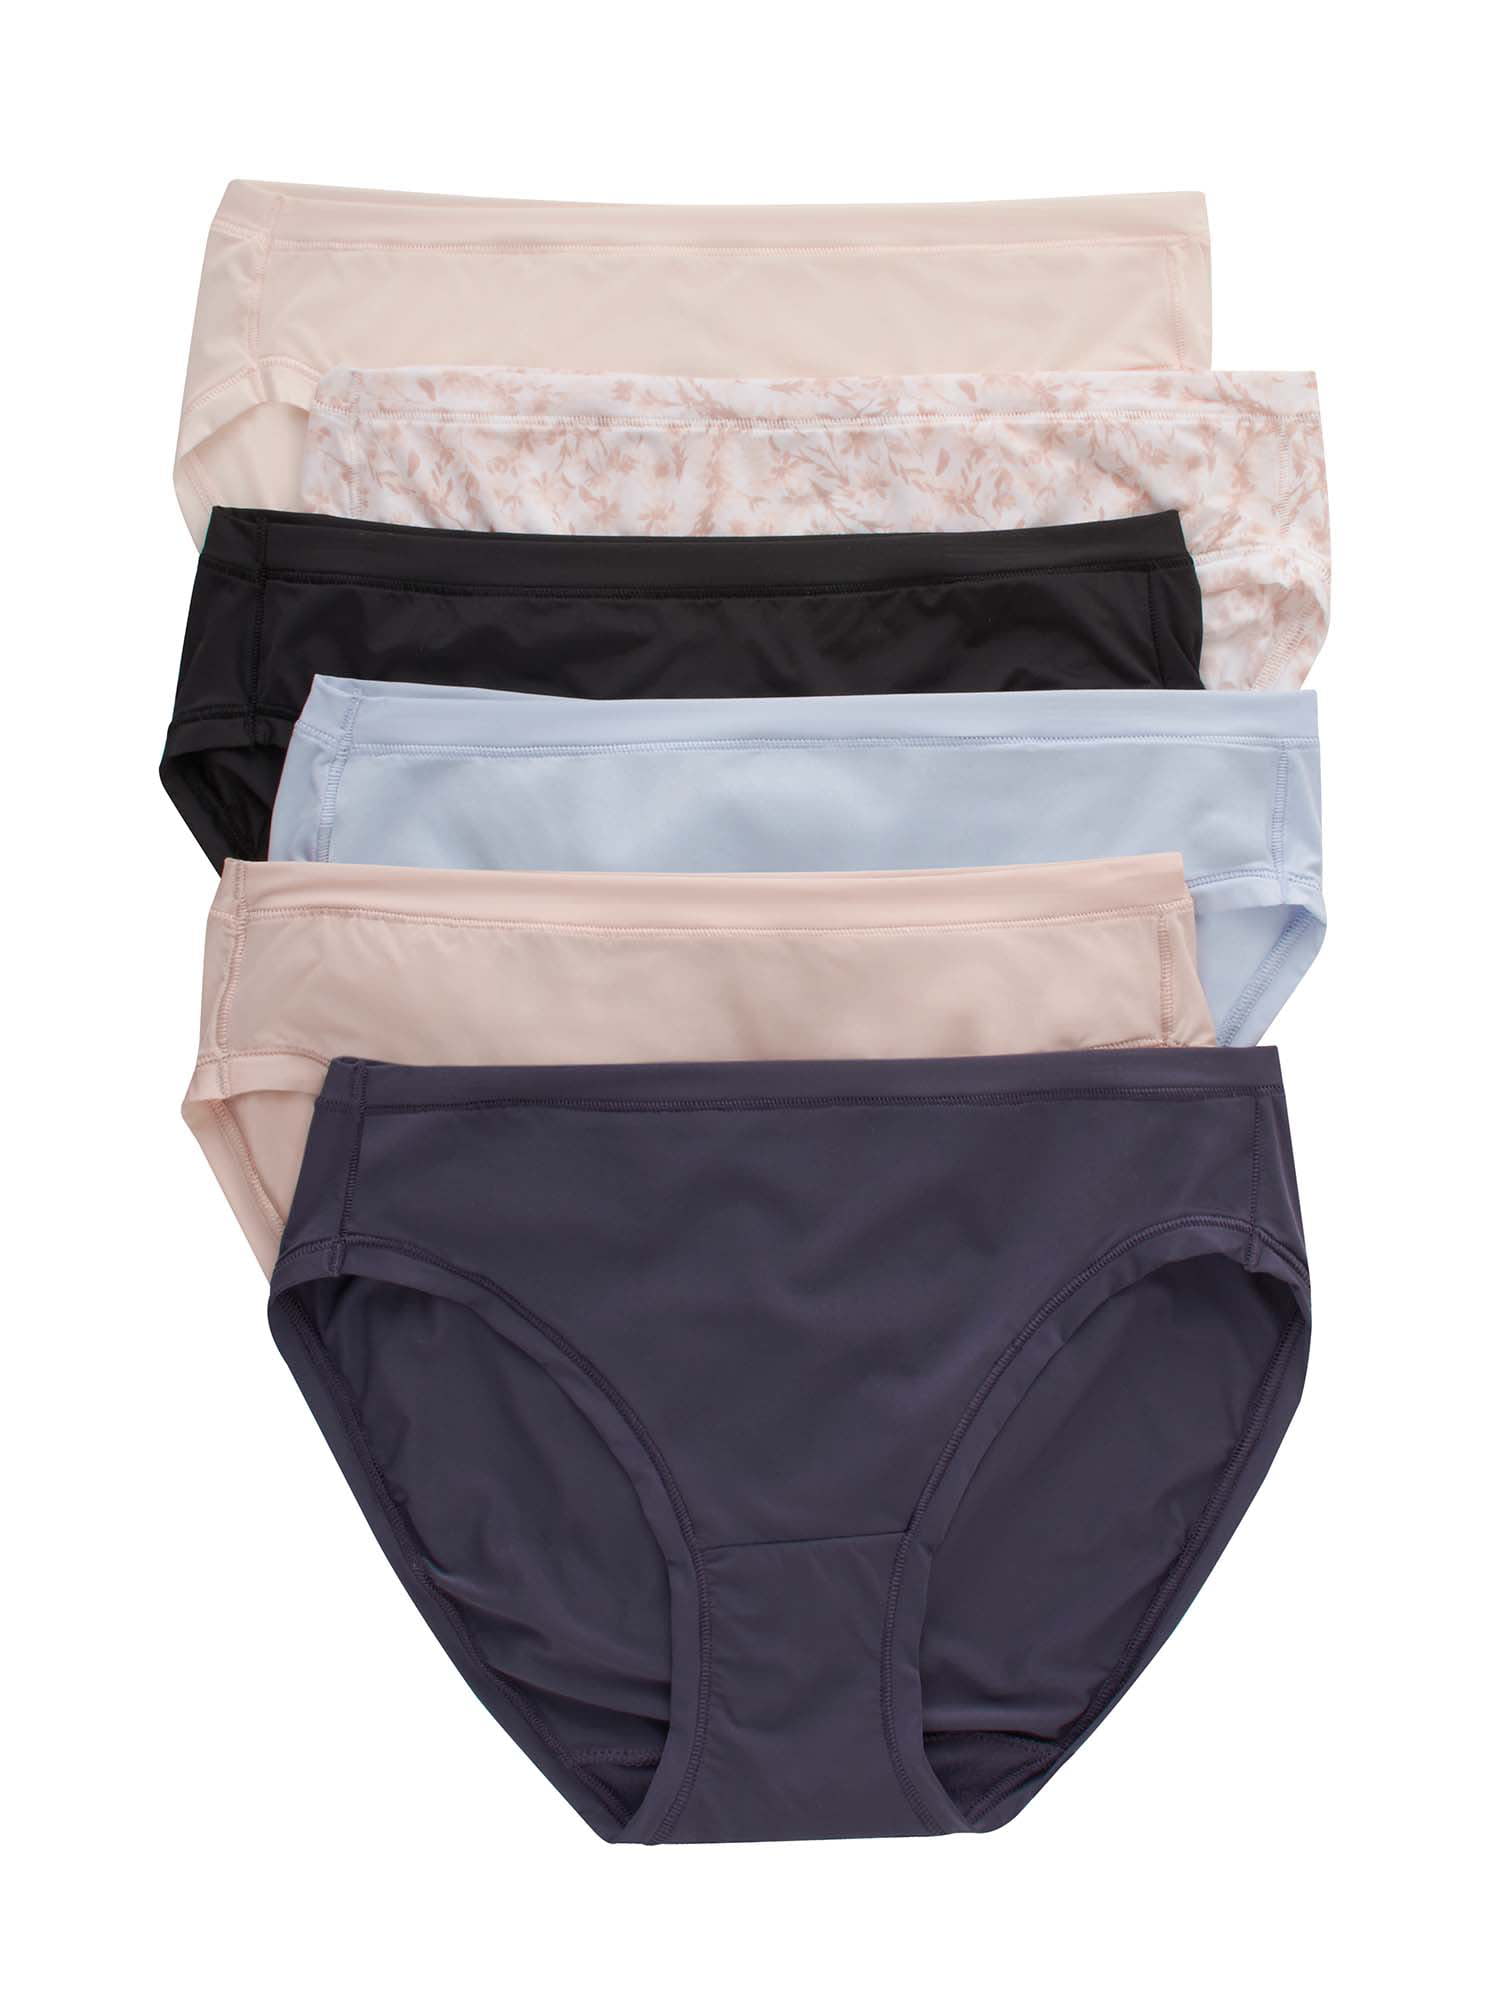 Hanes Women's Assorted Comfort Flex Fit Microfiber Stretch Modern Brief 6  pack - DroneUp Delivery